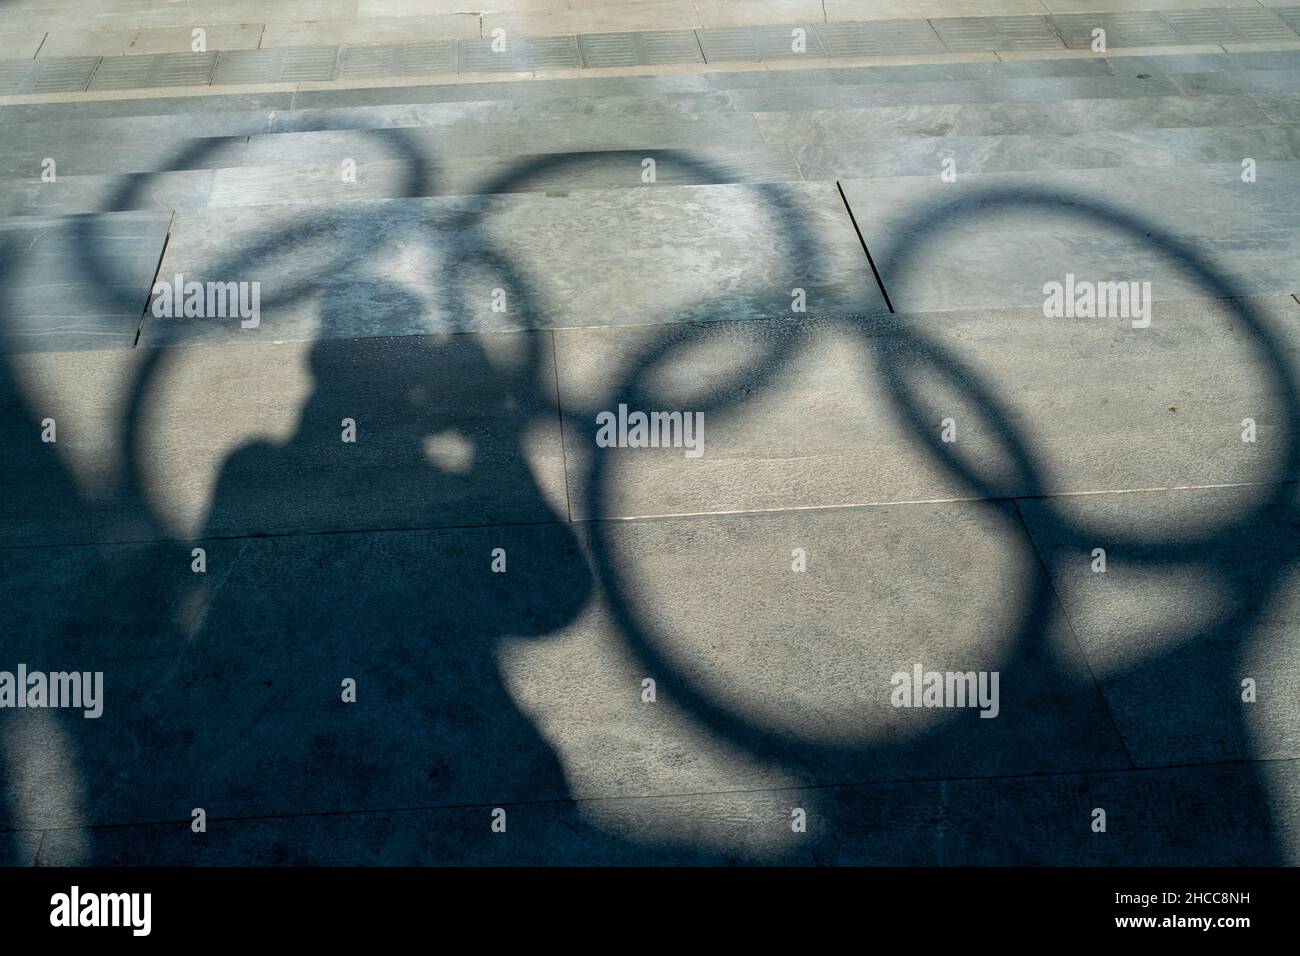 The projection of the Olympic rings on the ground. 26-Dec-2021 Stock Photo